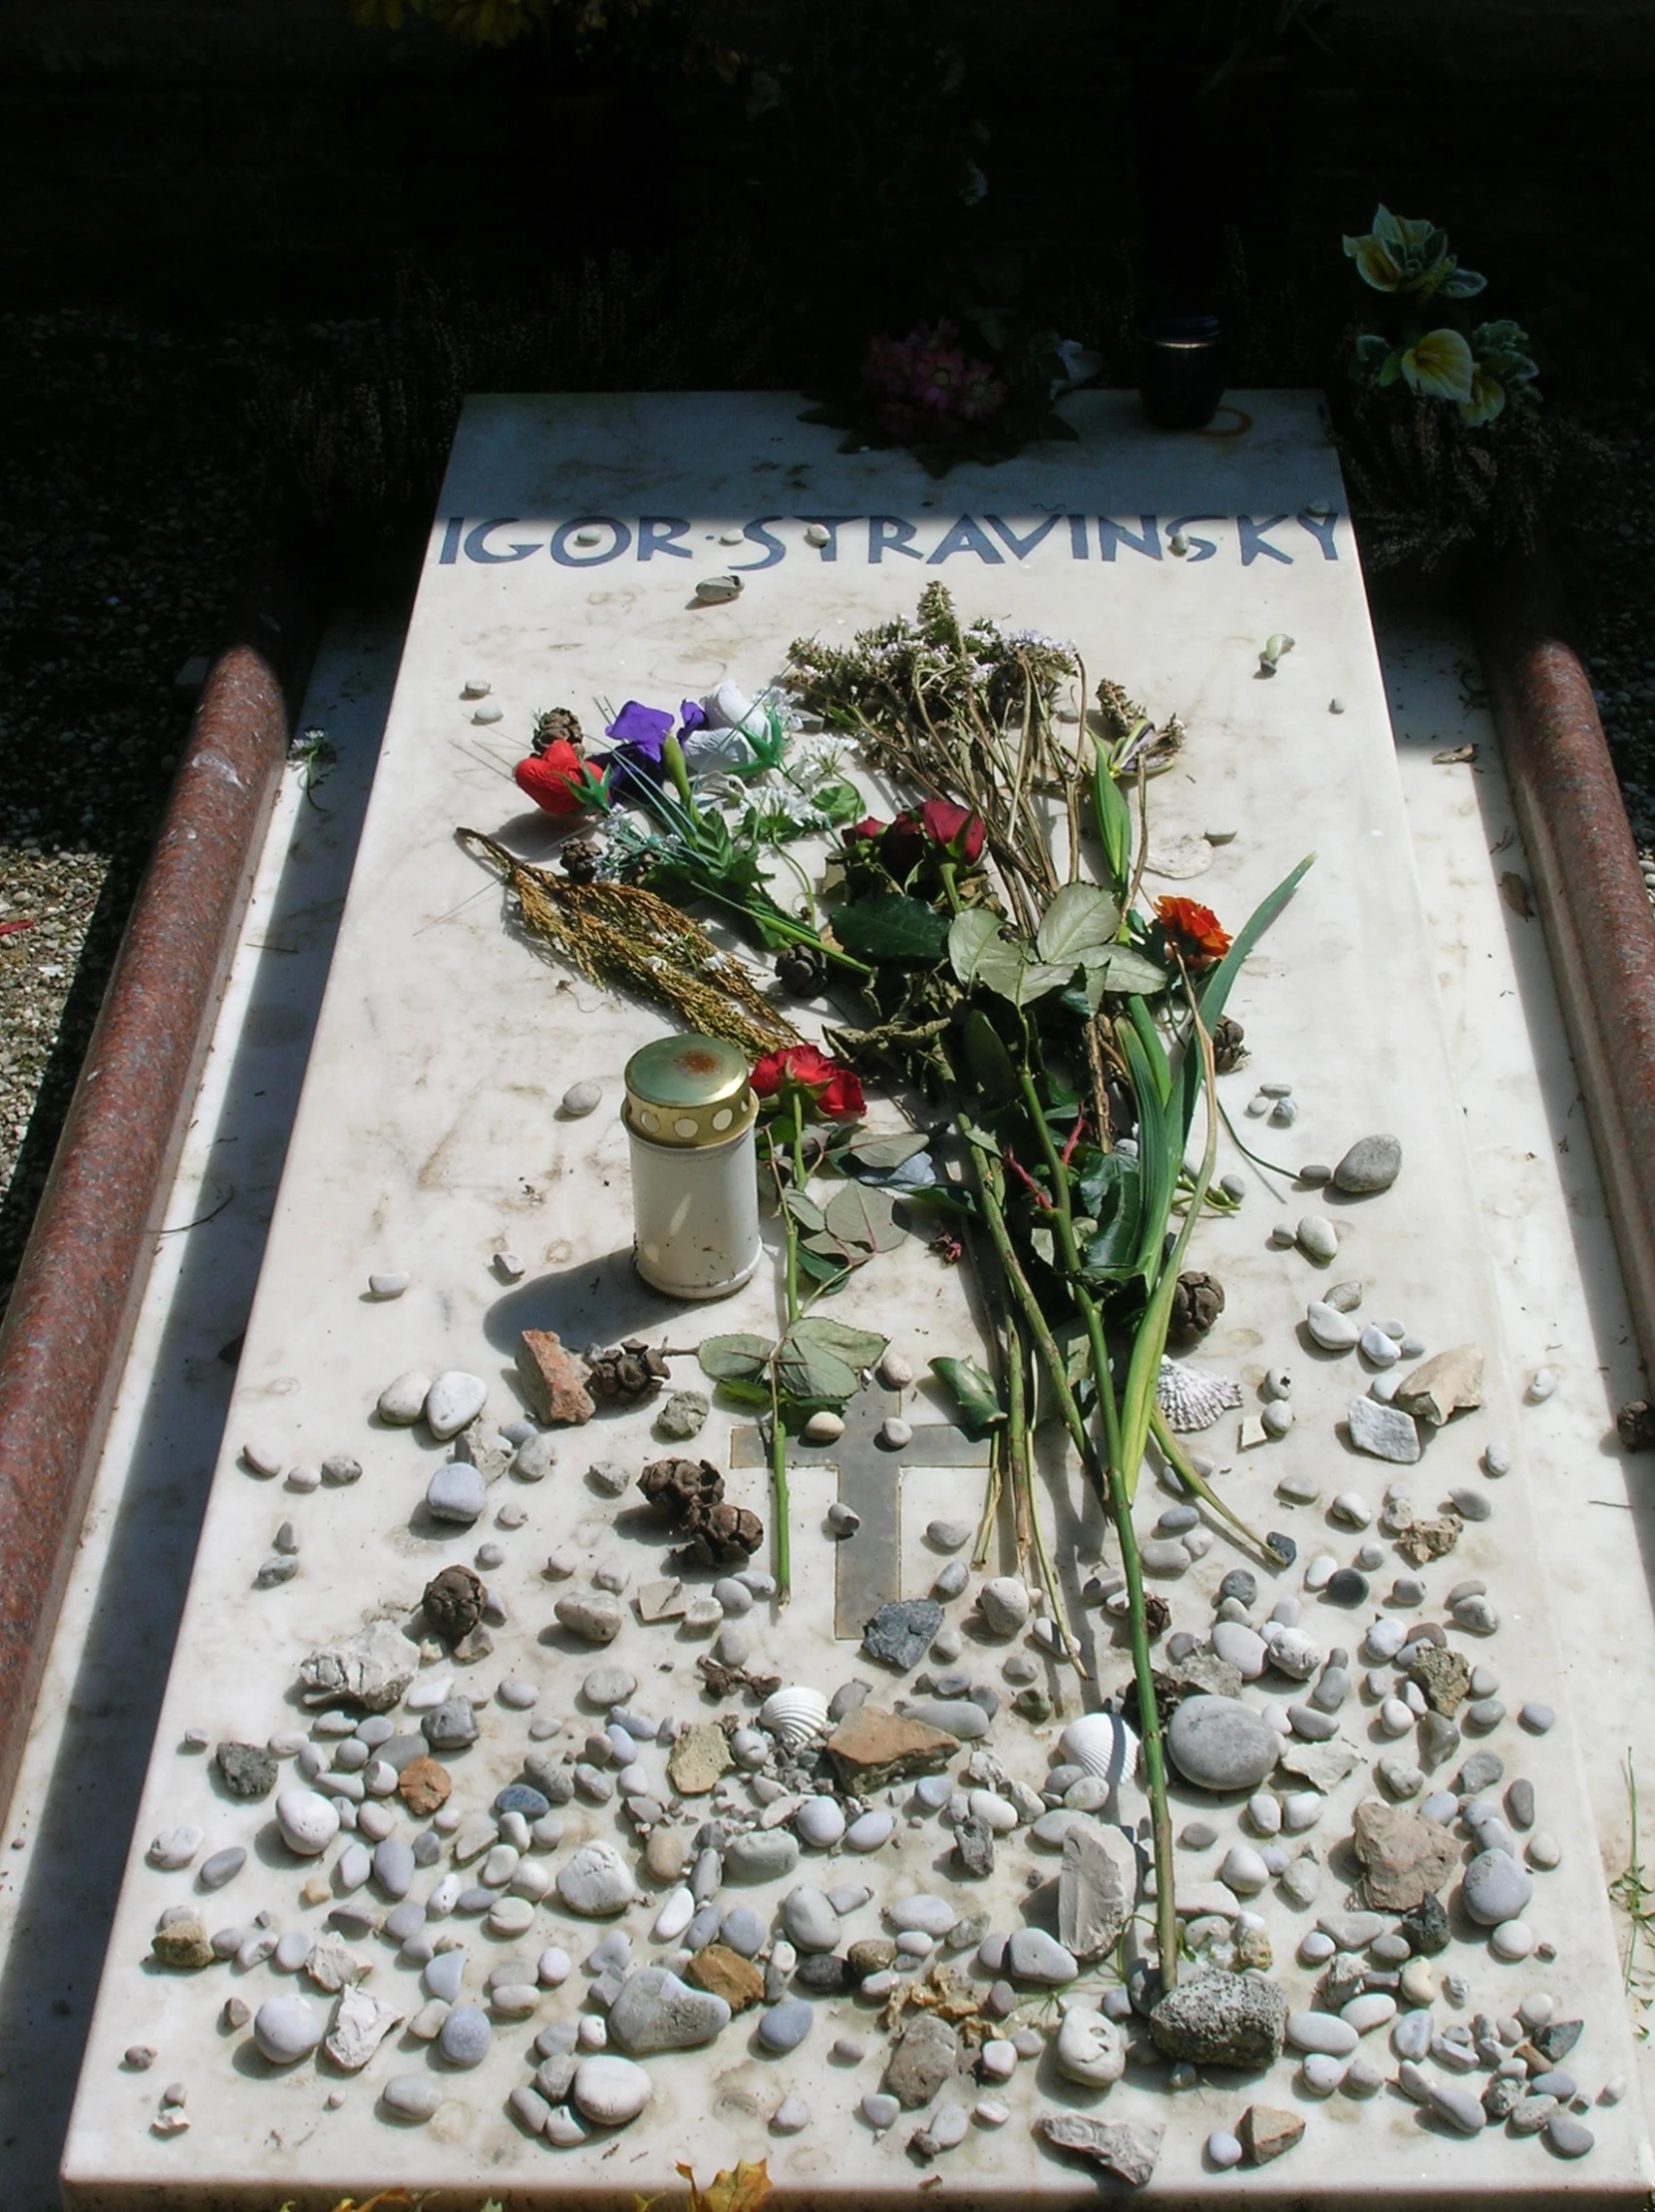 a dead body covered in stones and flowers